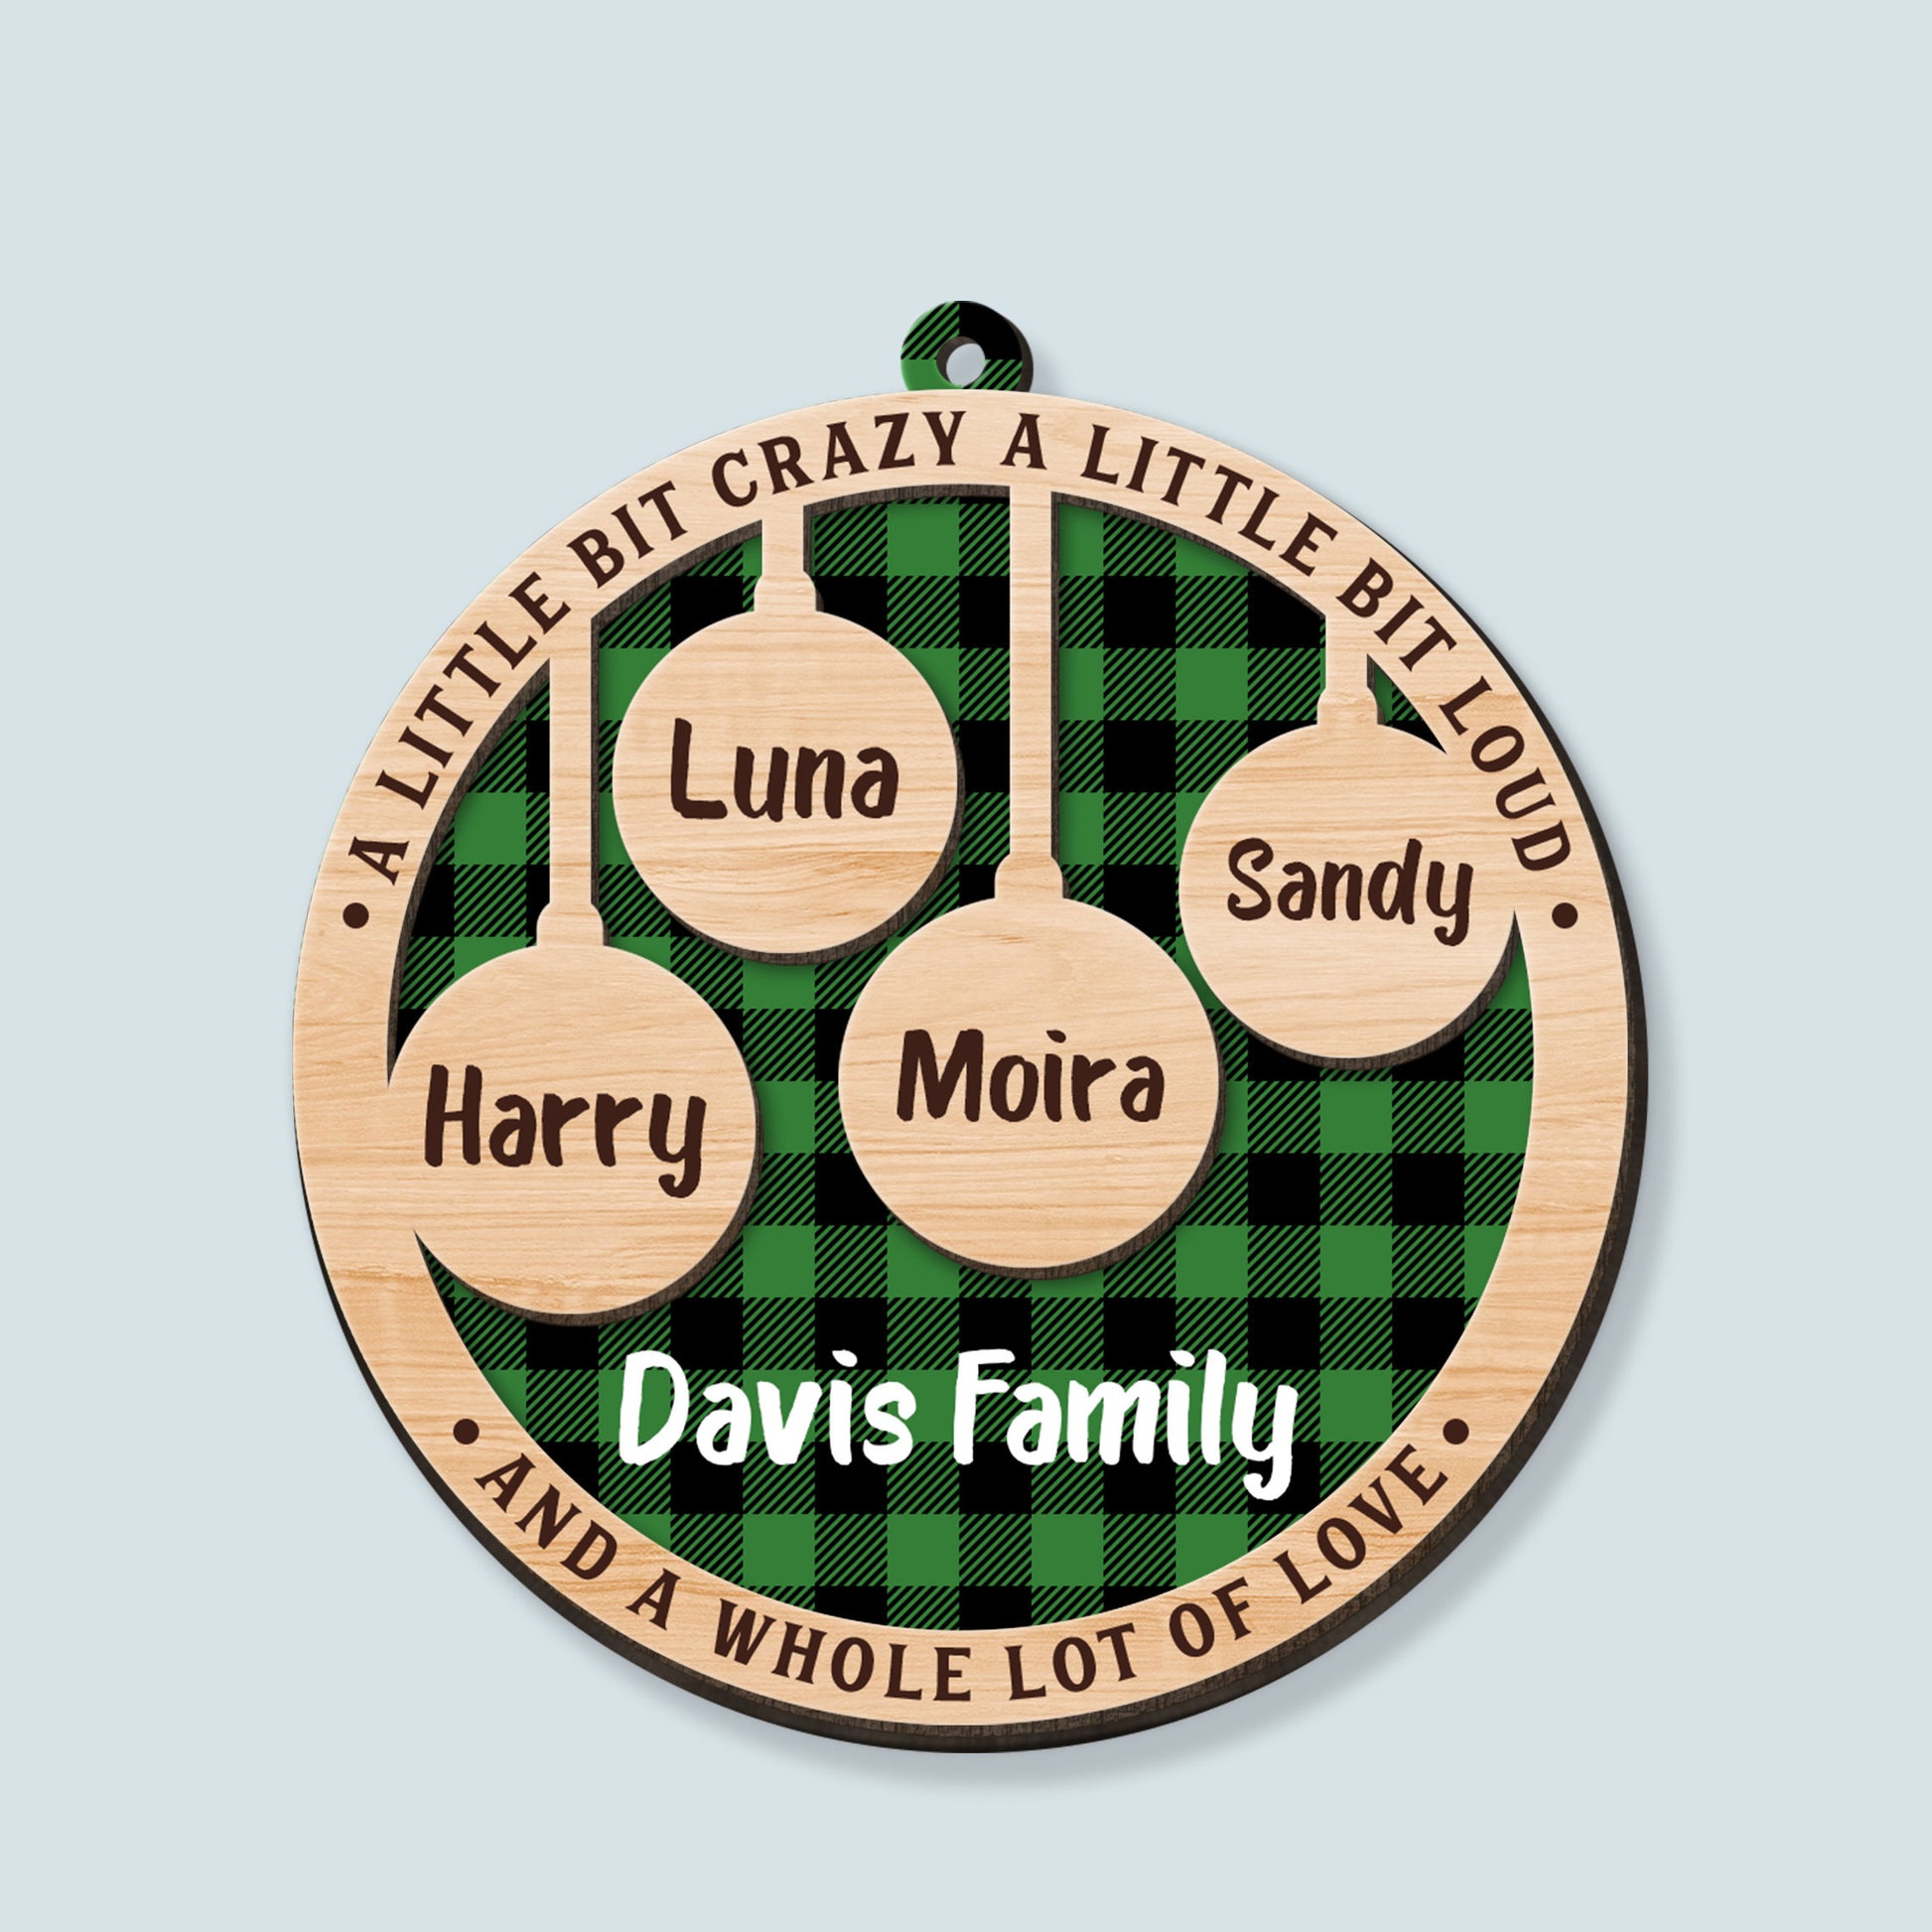 Whole Lot Of Love - Personalized 2 Layers Wooden Ornament - Christmas Gift For Family Members